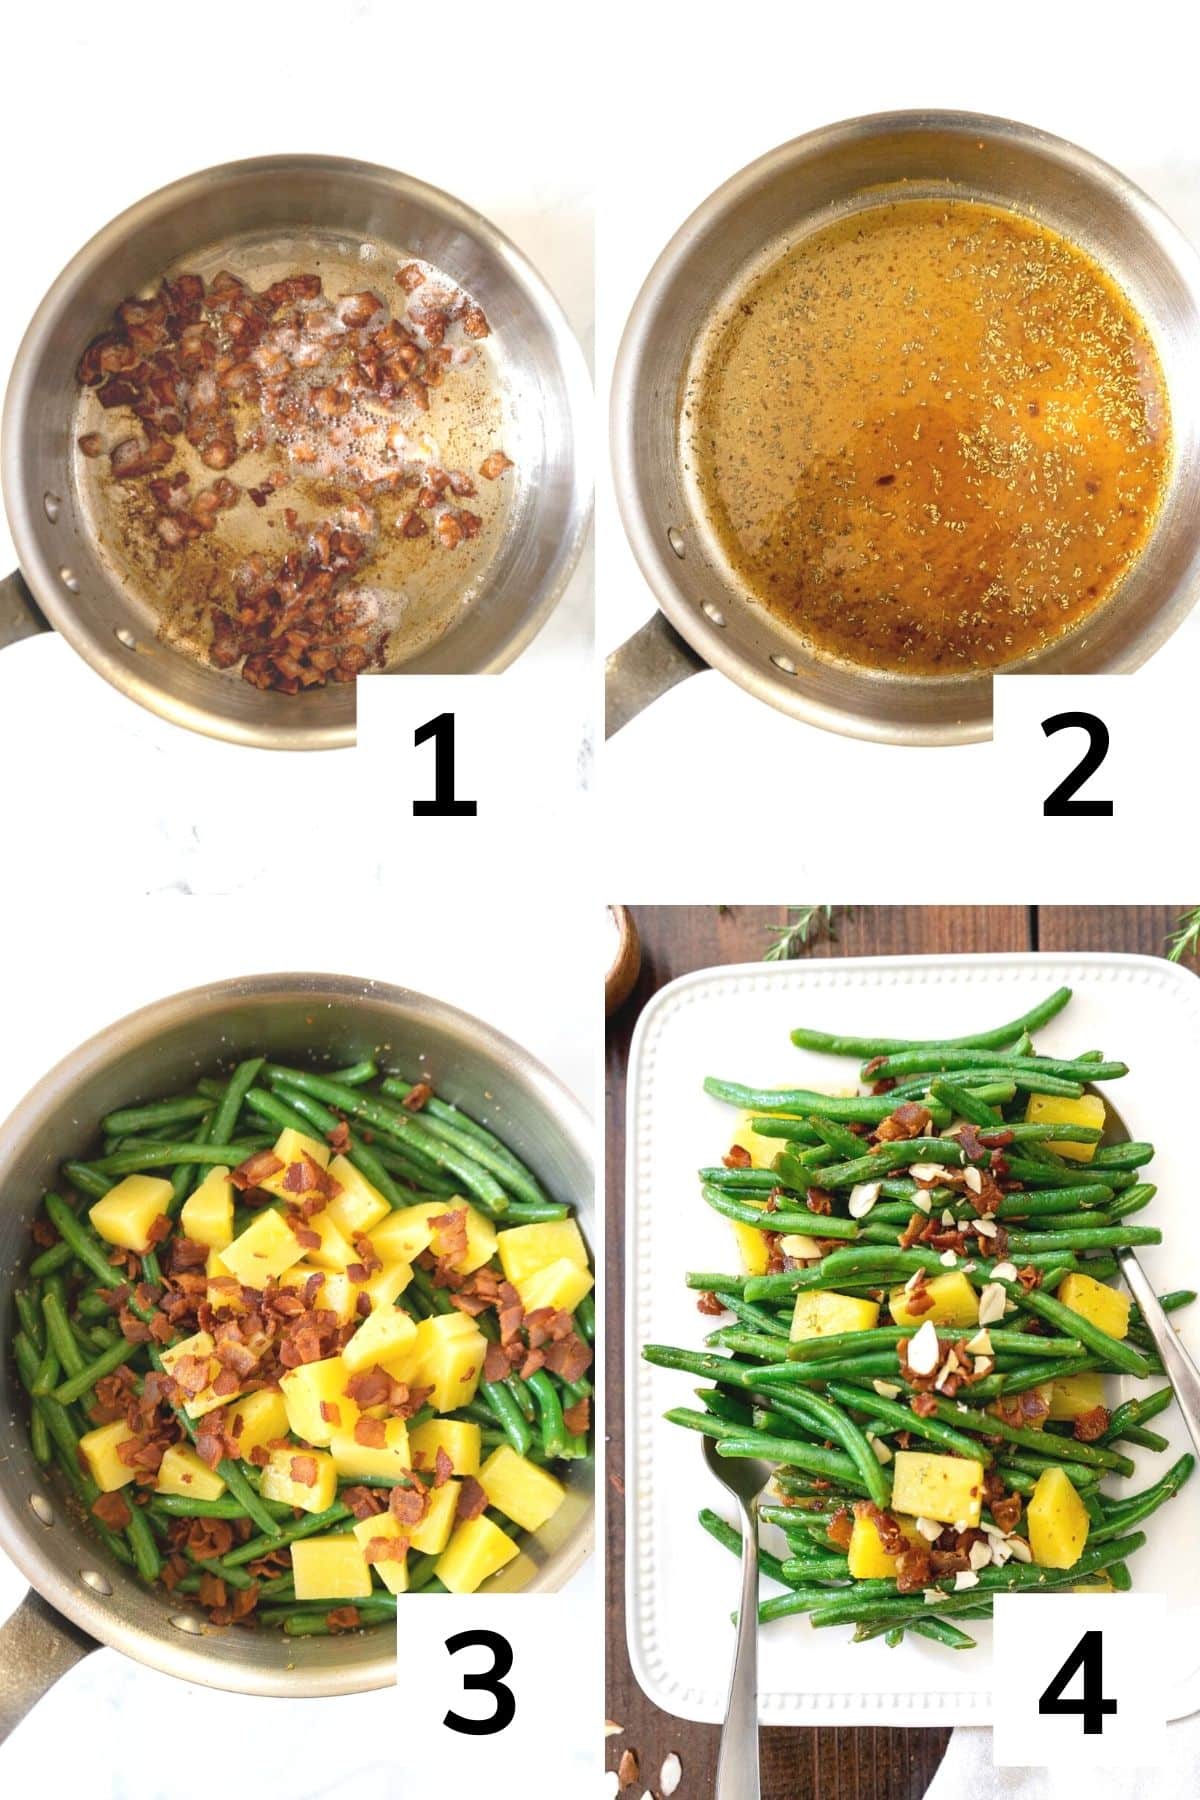 How to make green beans with pineapple and bacon step by step